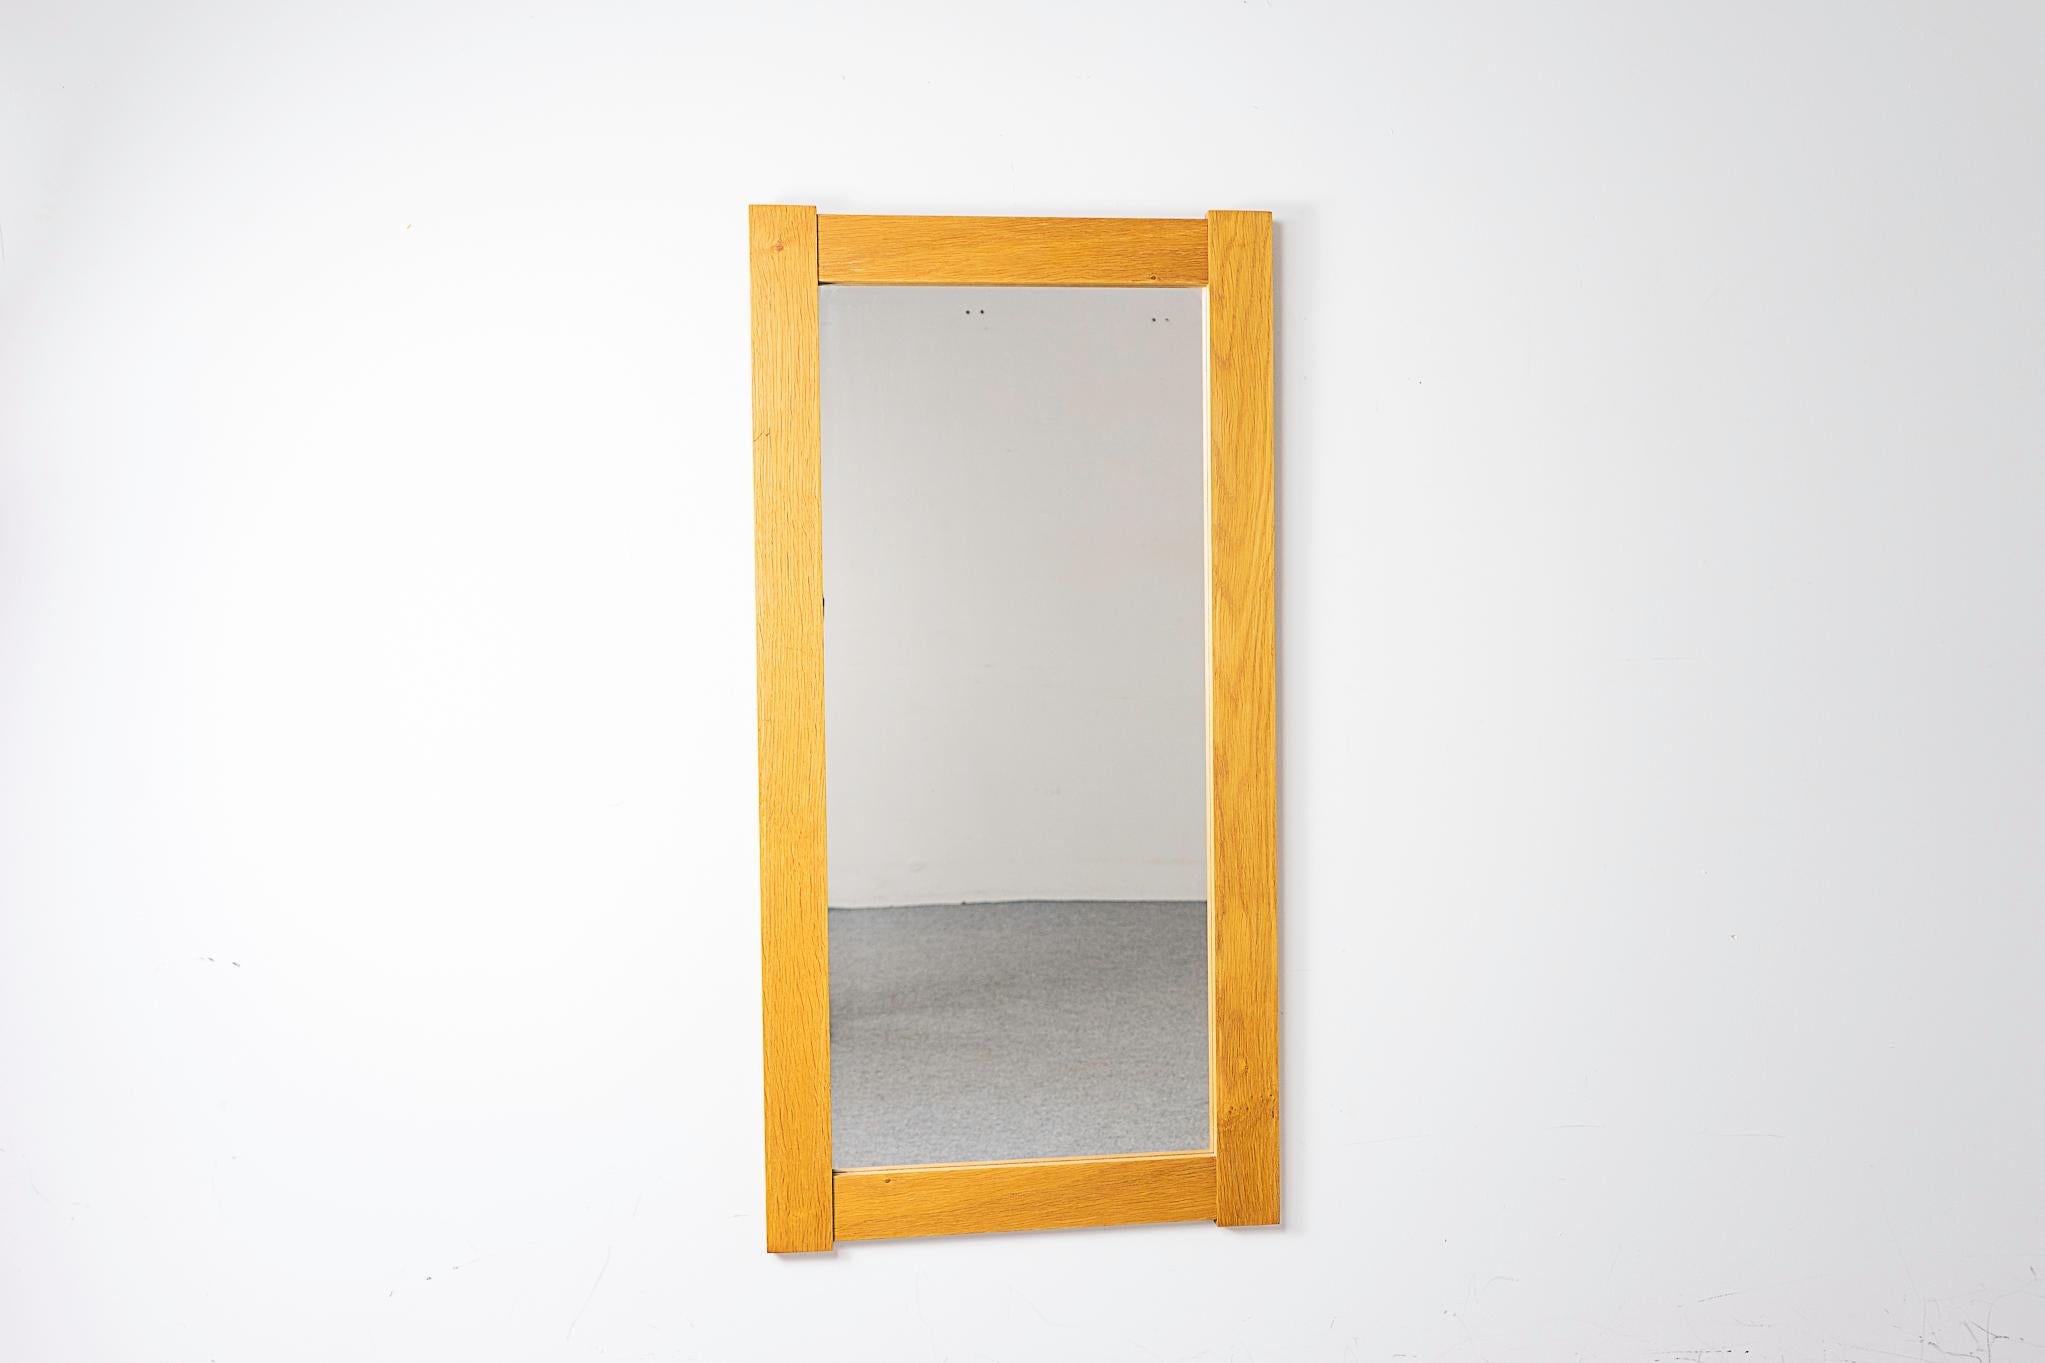 Oak mid-century Danish mirror, circa 1960's. The perfect compliment to any interior especially in small apartments, condos and lofts where space can be tight.